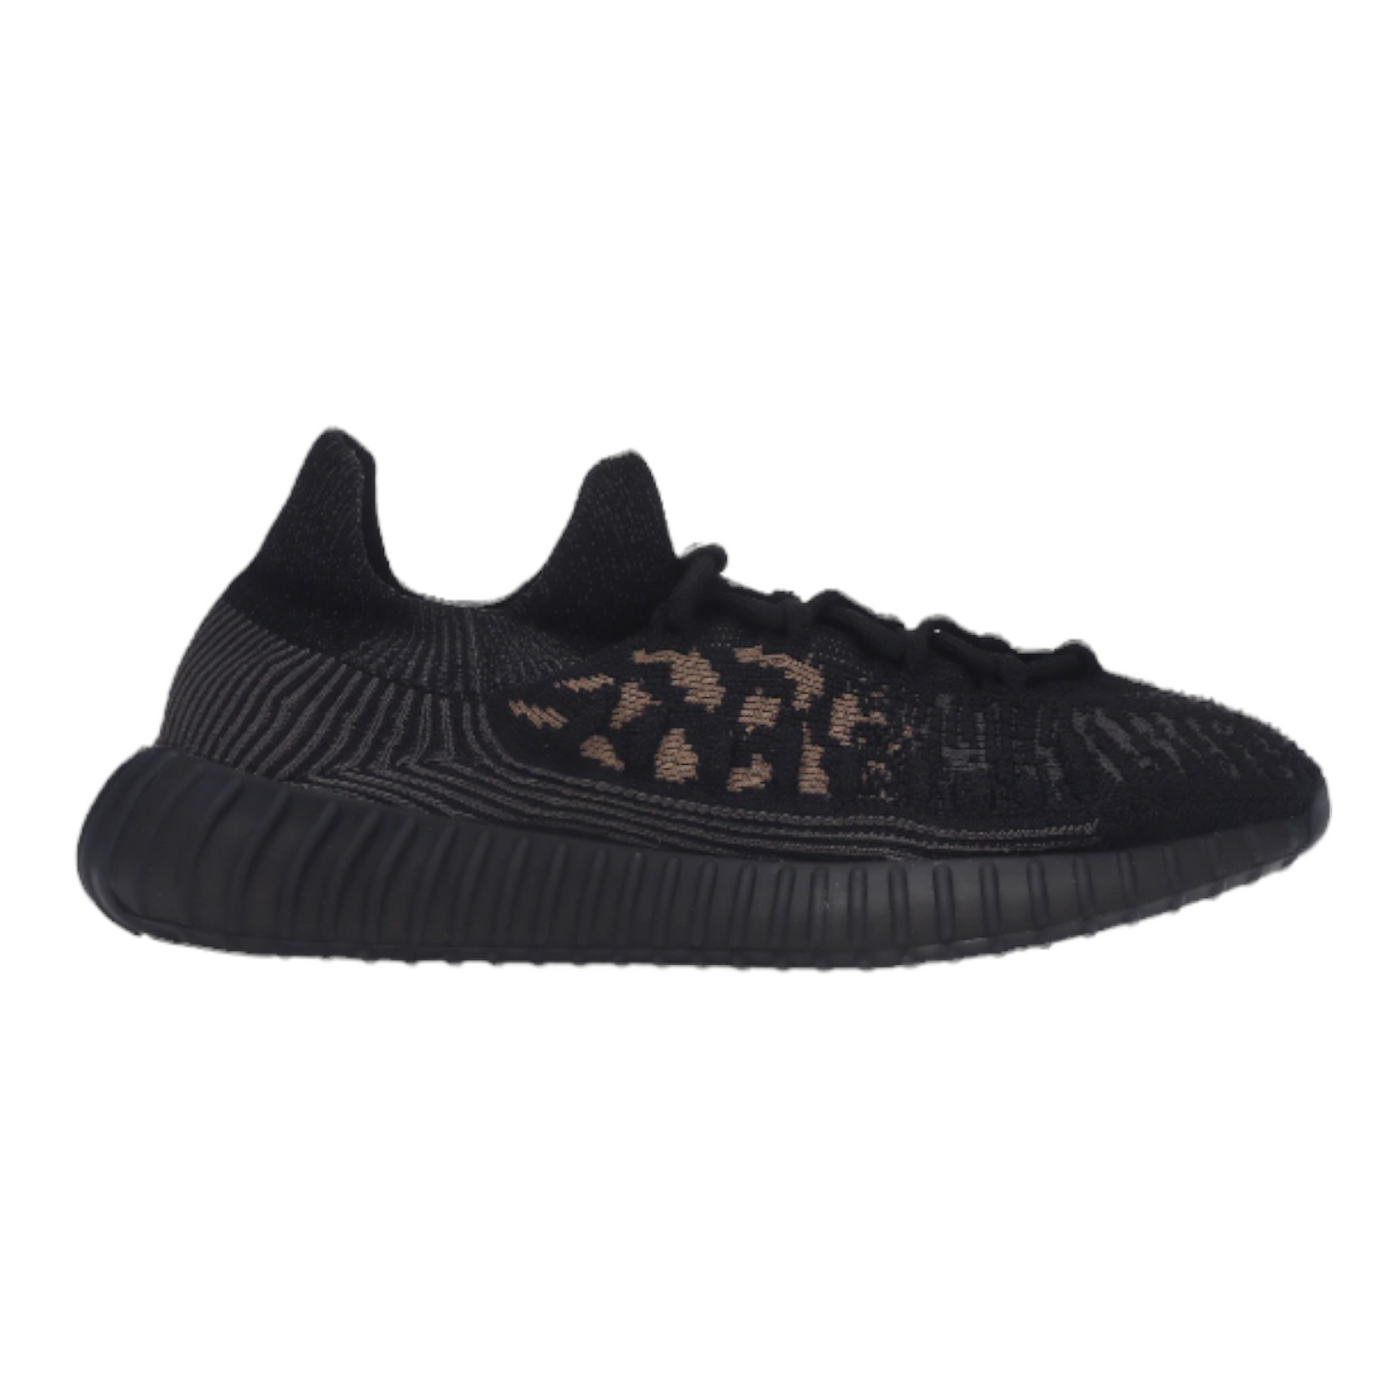 ADIDAS YEEZY BOOST 350 CMPCT V2 SLATE CARBON